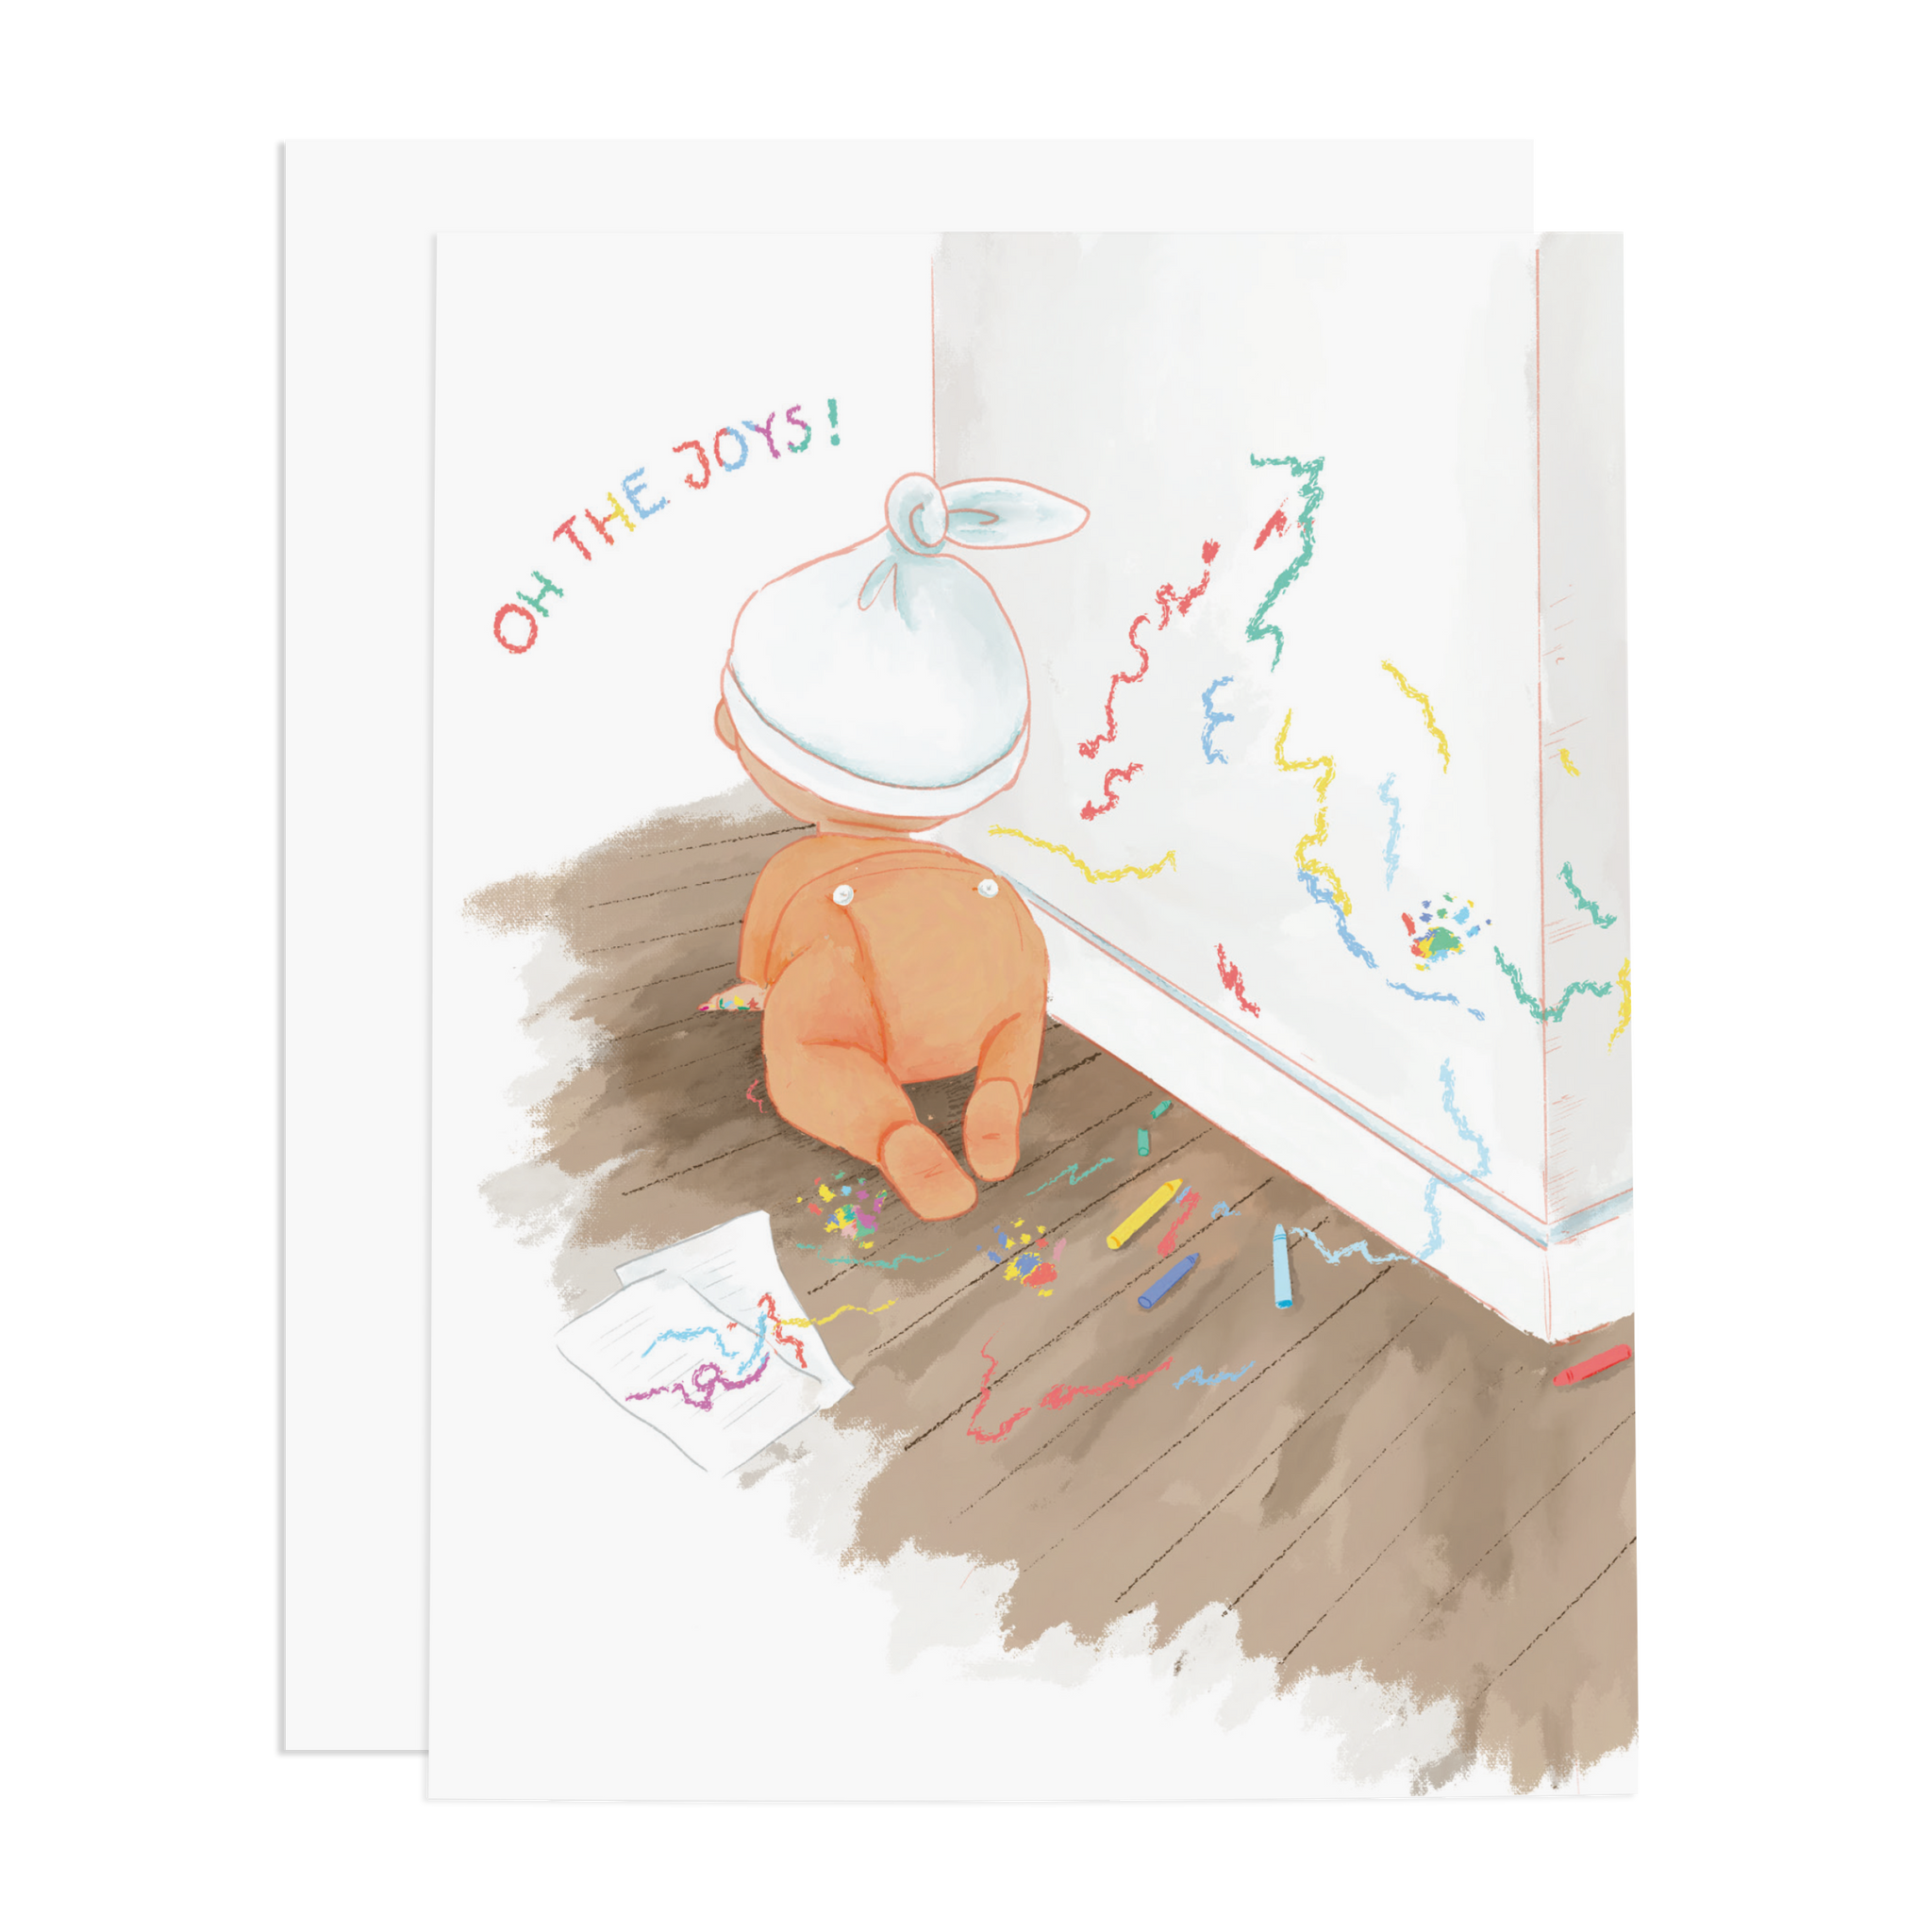 Oh The Joys ! Greeting Card